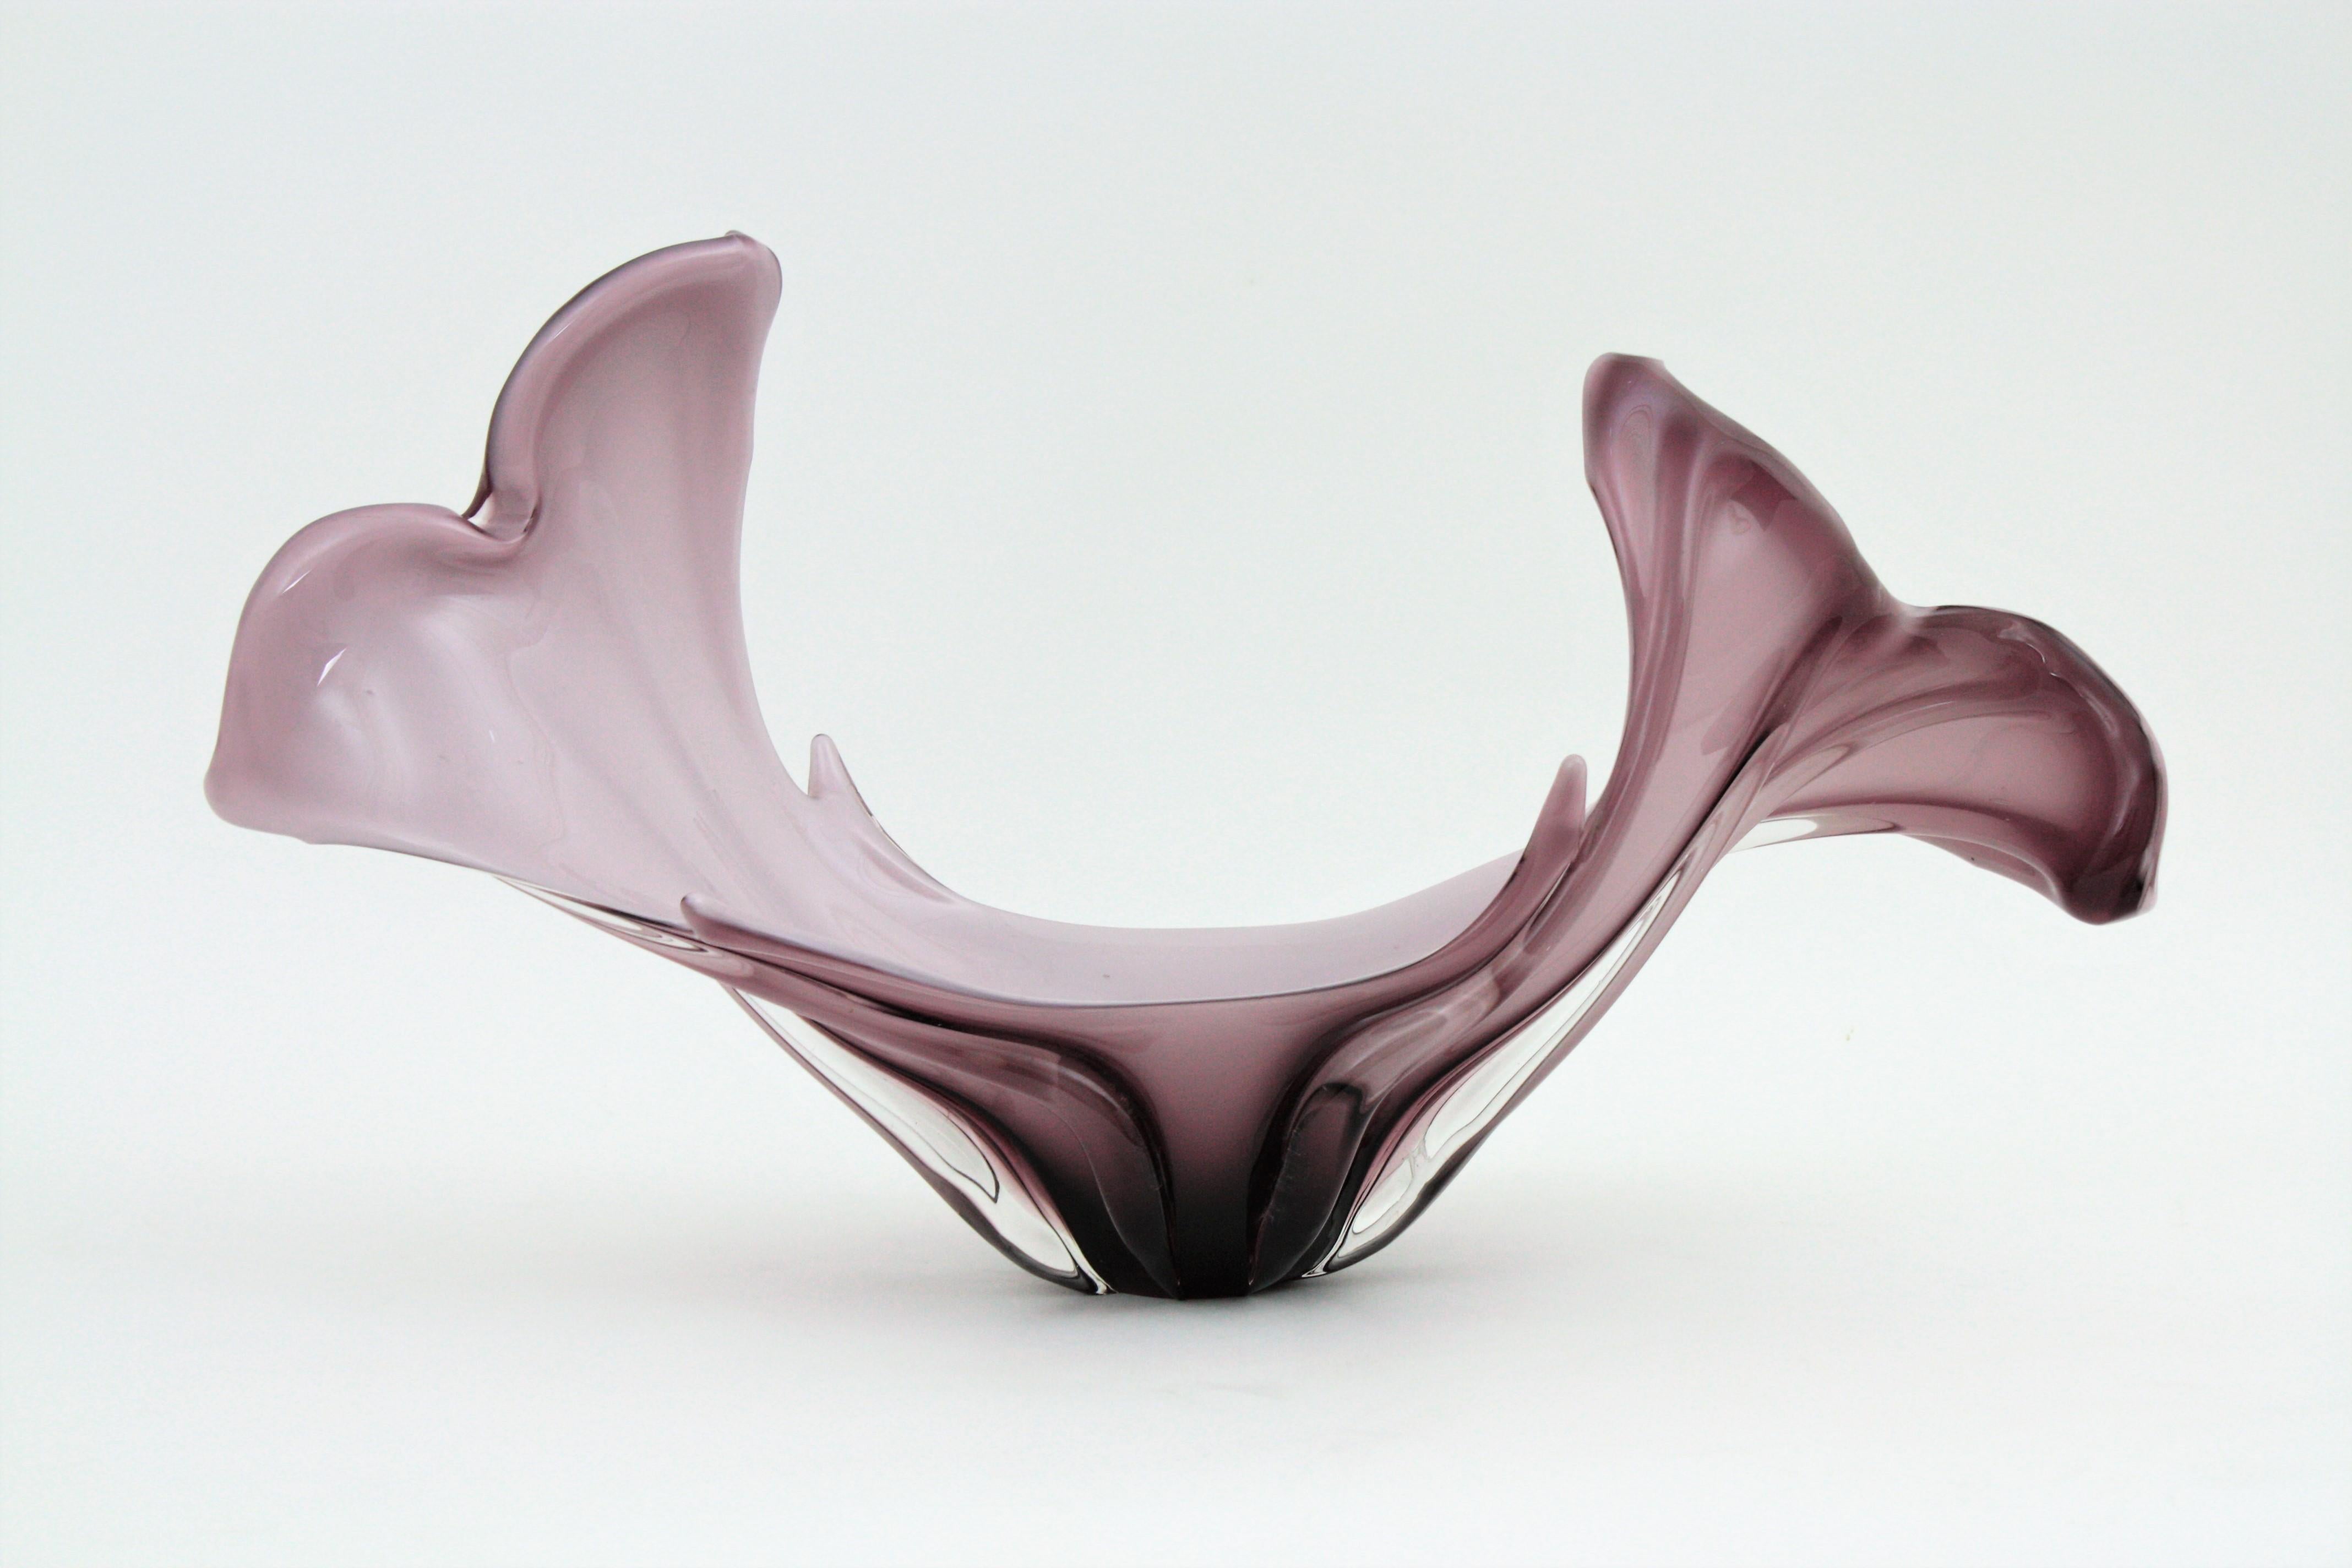 Outstanding hand blown Sommerso Murano large centerpiece with organic design in purple and white glass, Italy, 1960s.
The interior part is made in white Opaline glass and the exterior part made in shades of pink to purple.
This vase is highly